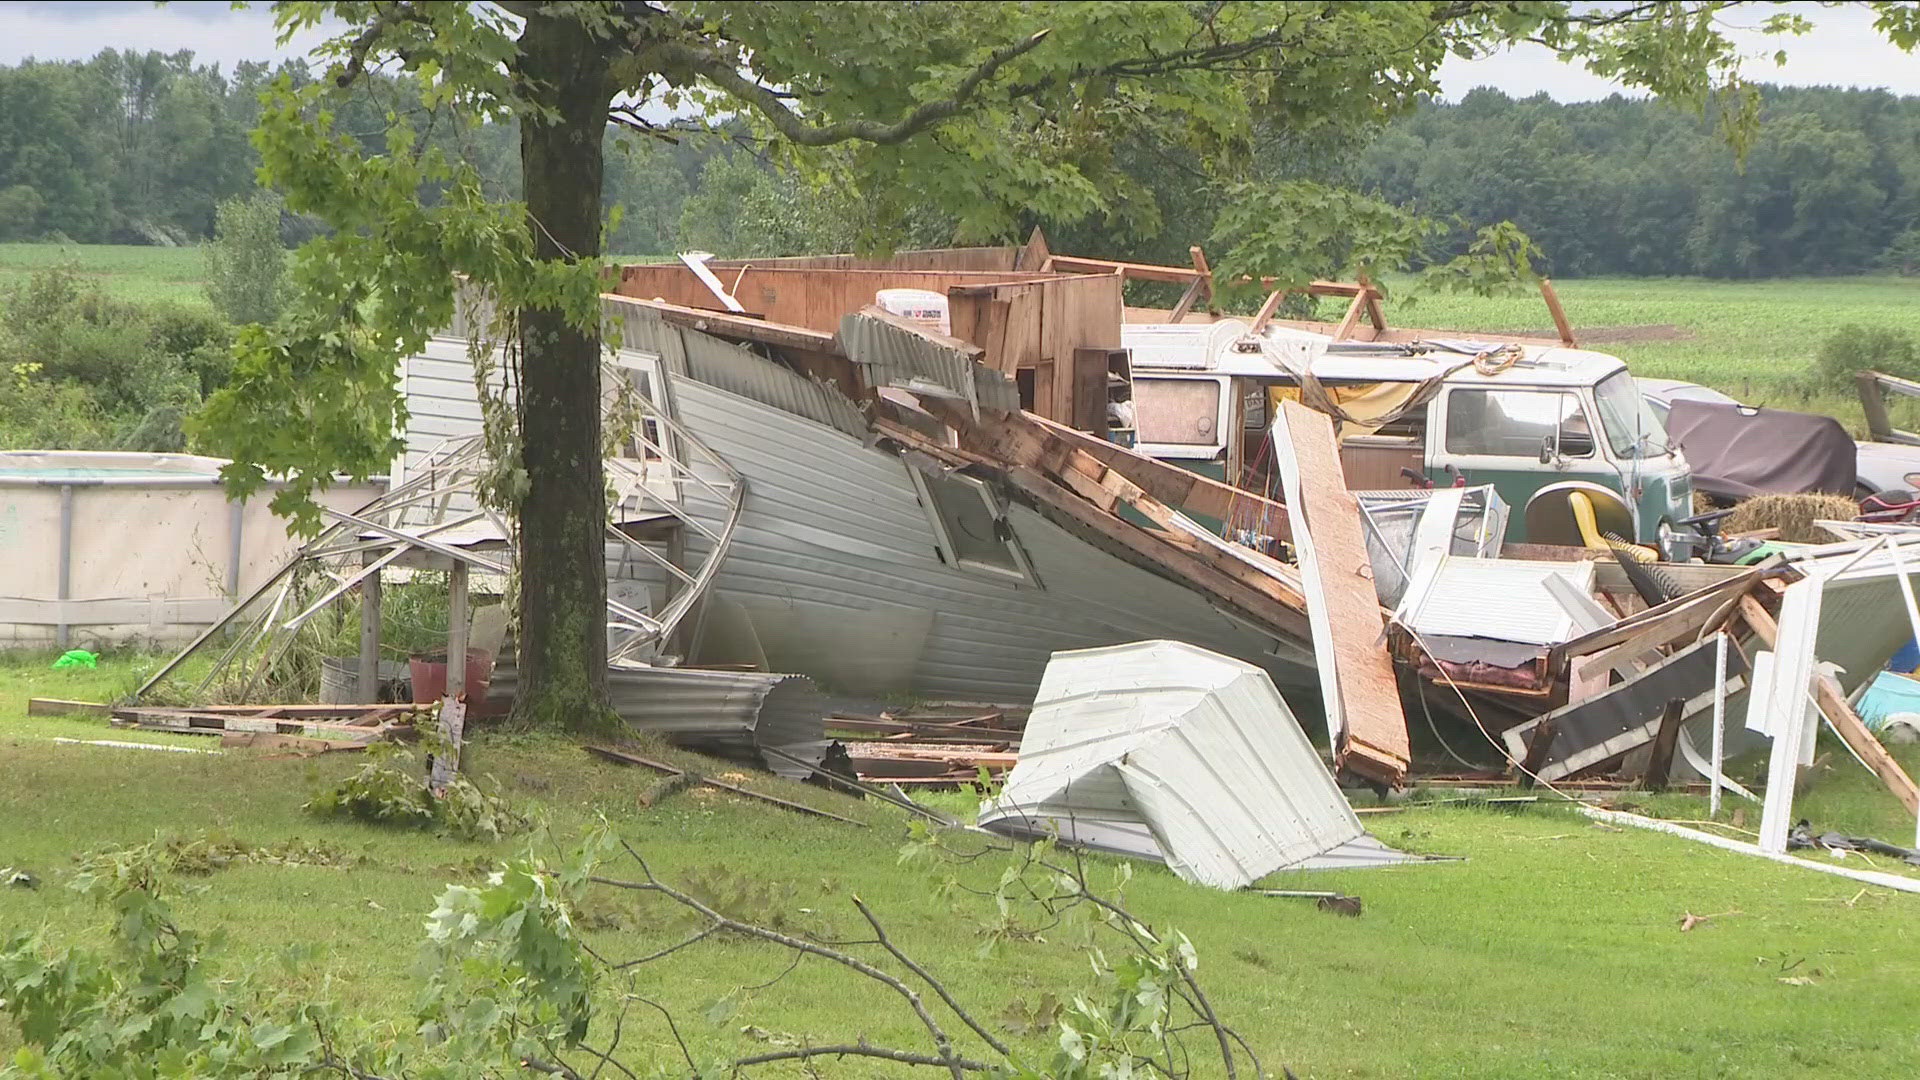 The home of Steven and Collen Bottas was right in the path of the EF zero tornado.